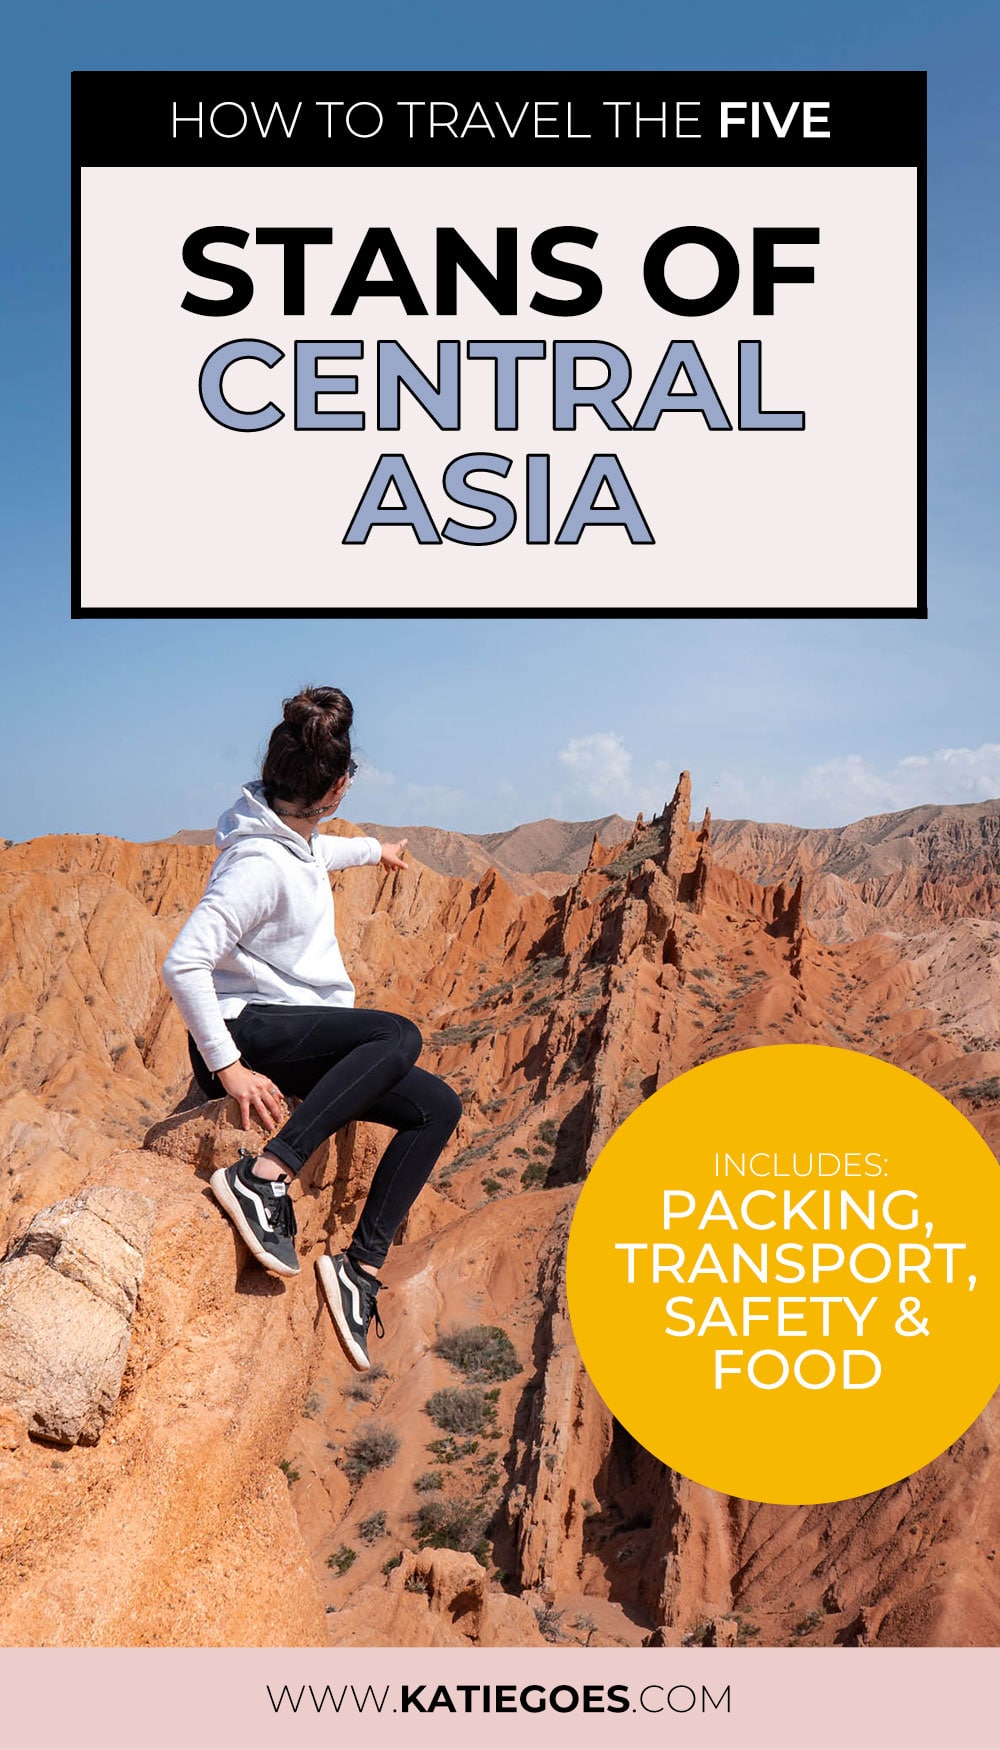 Visiting the Stan Countries: How to Travel the Five Stans of Central Asia